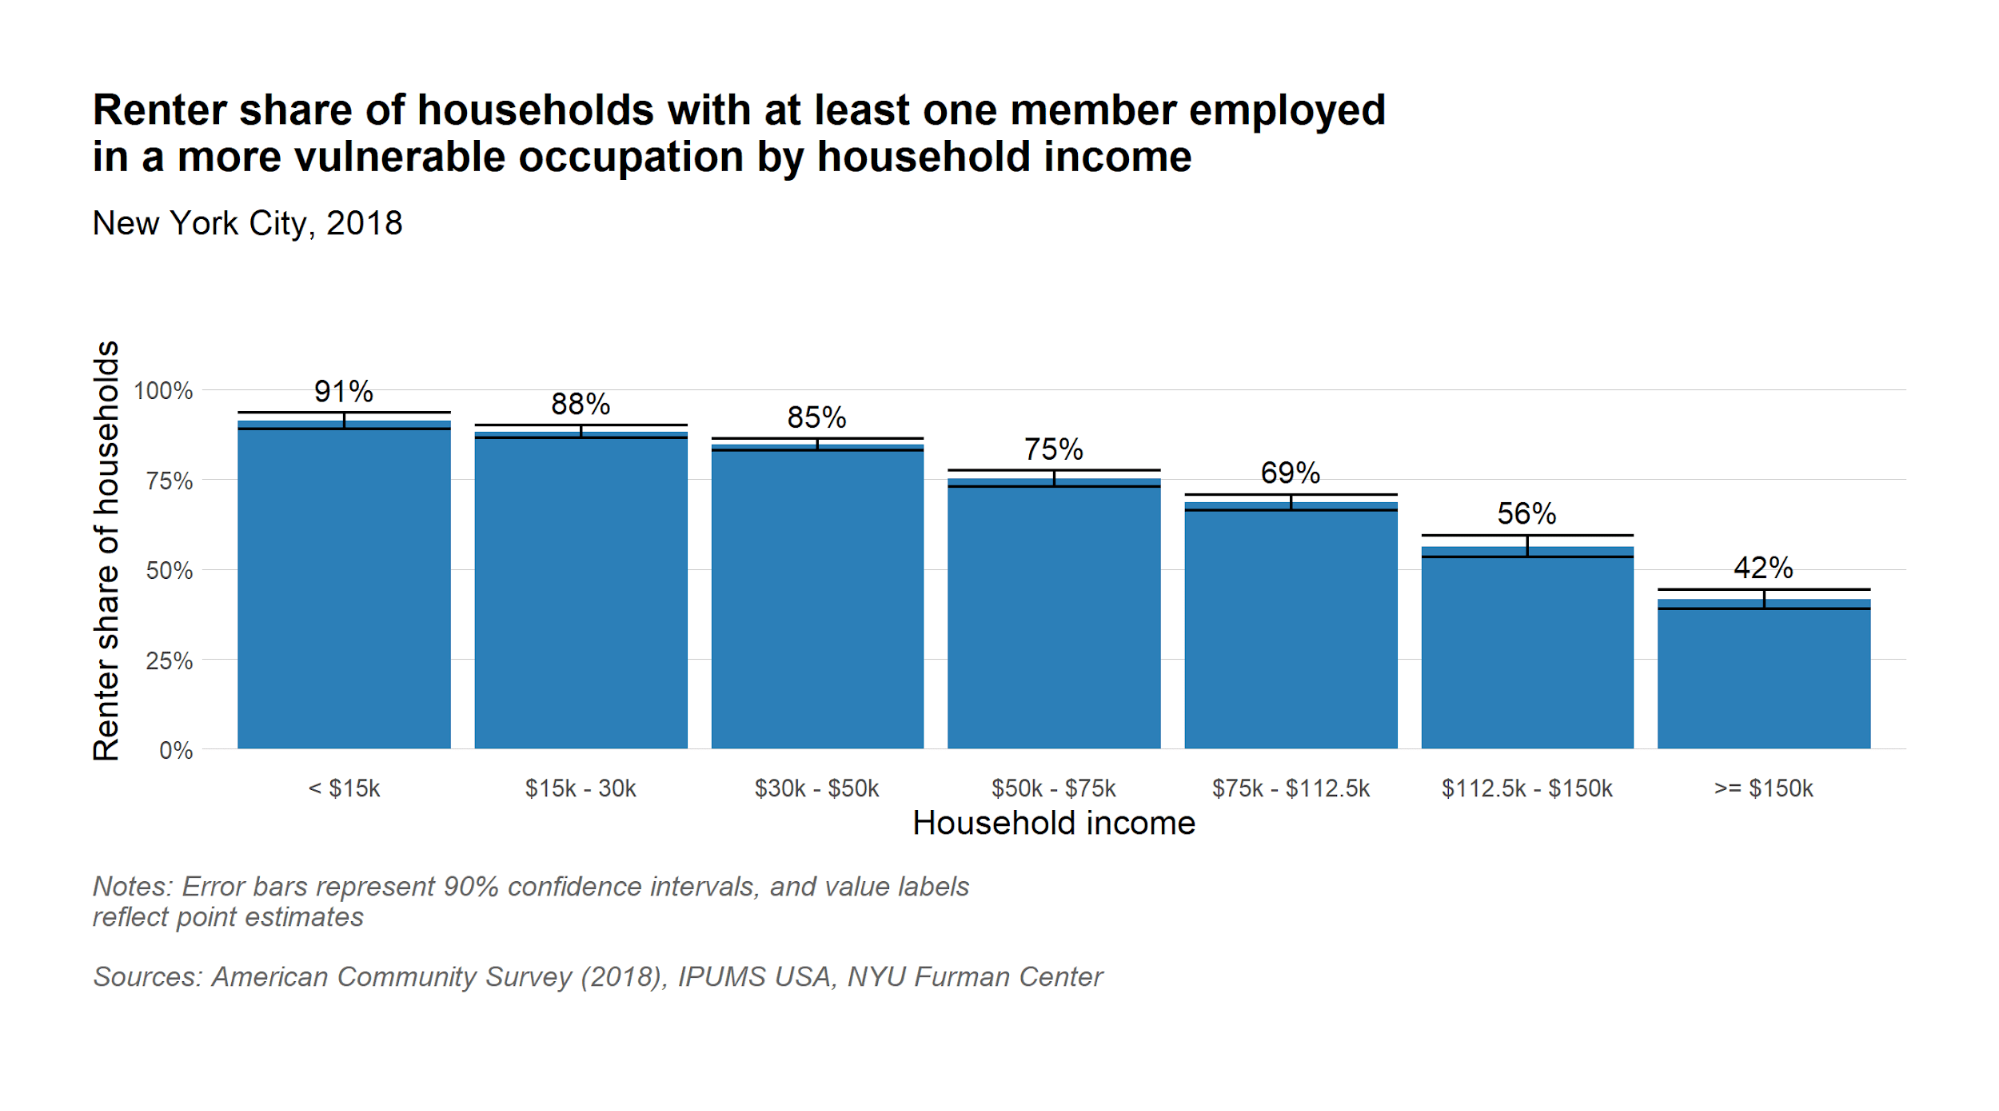 Renter share of households with at least one member in vulnerable occupation by household income